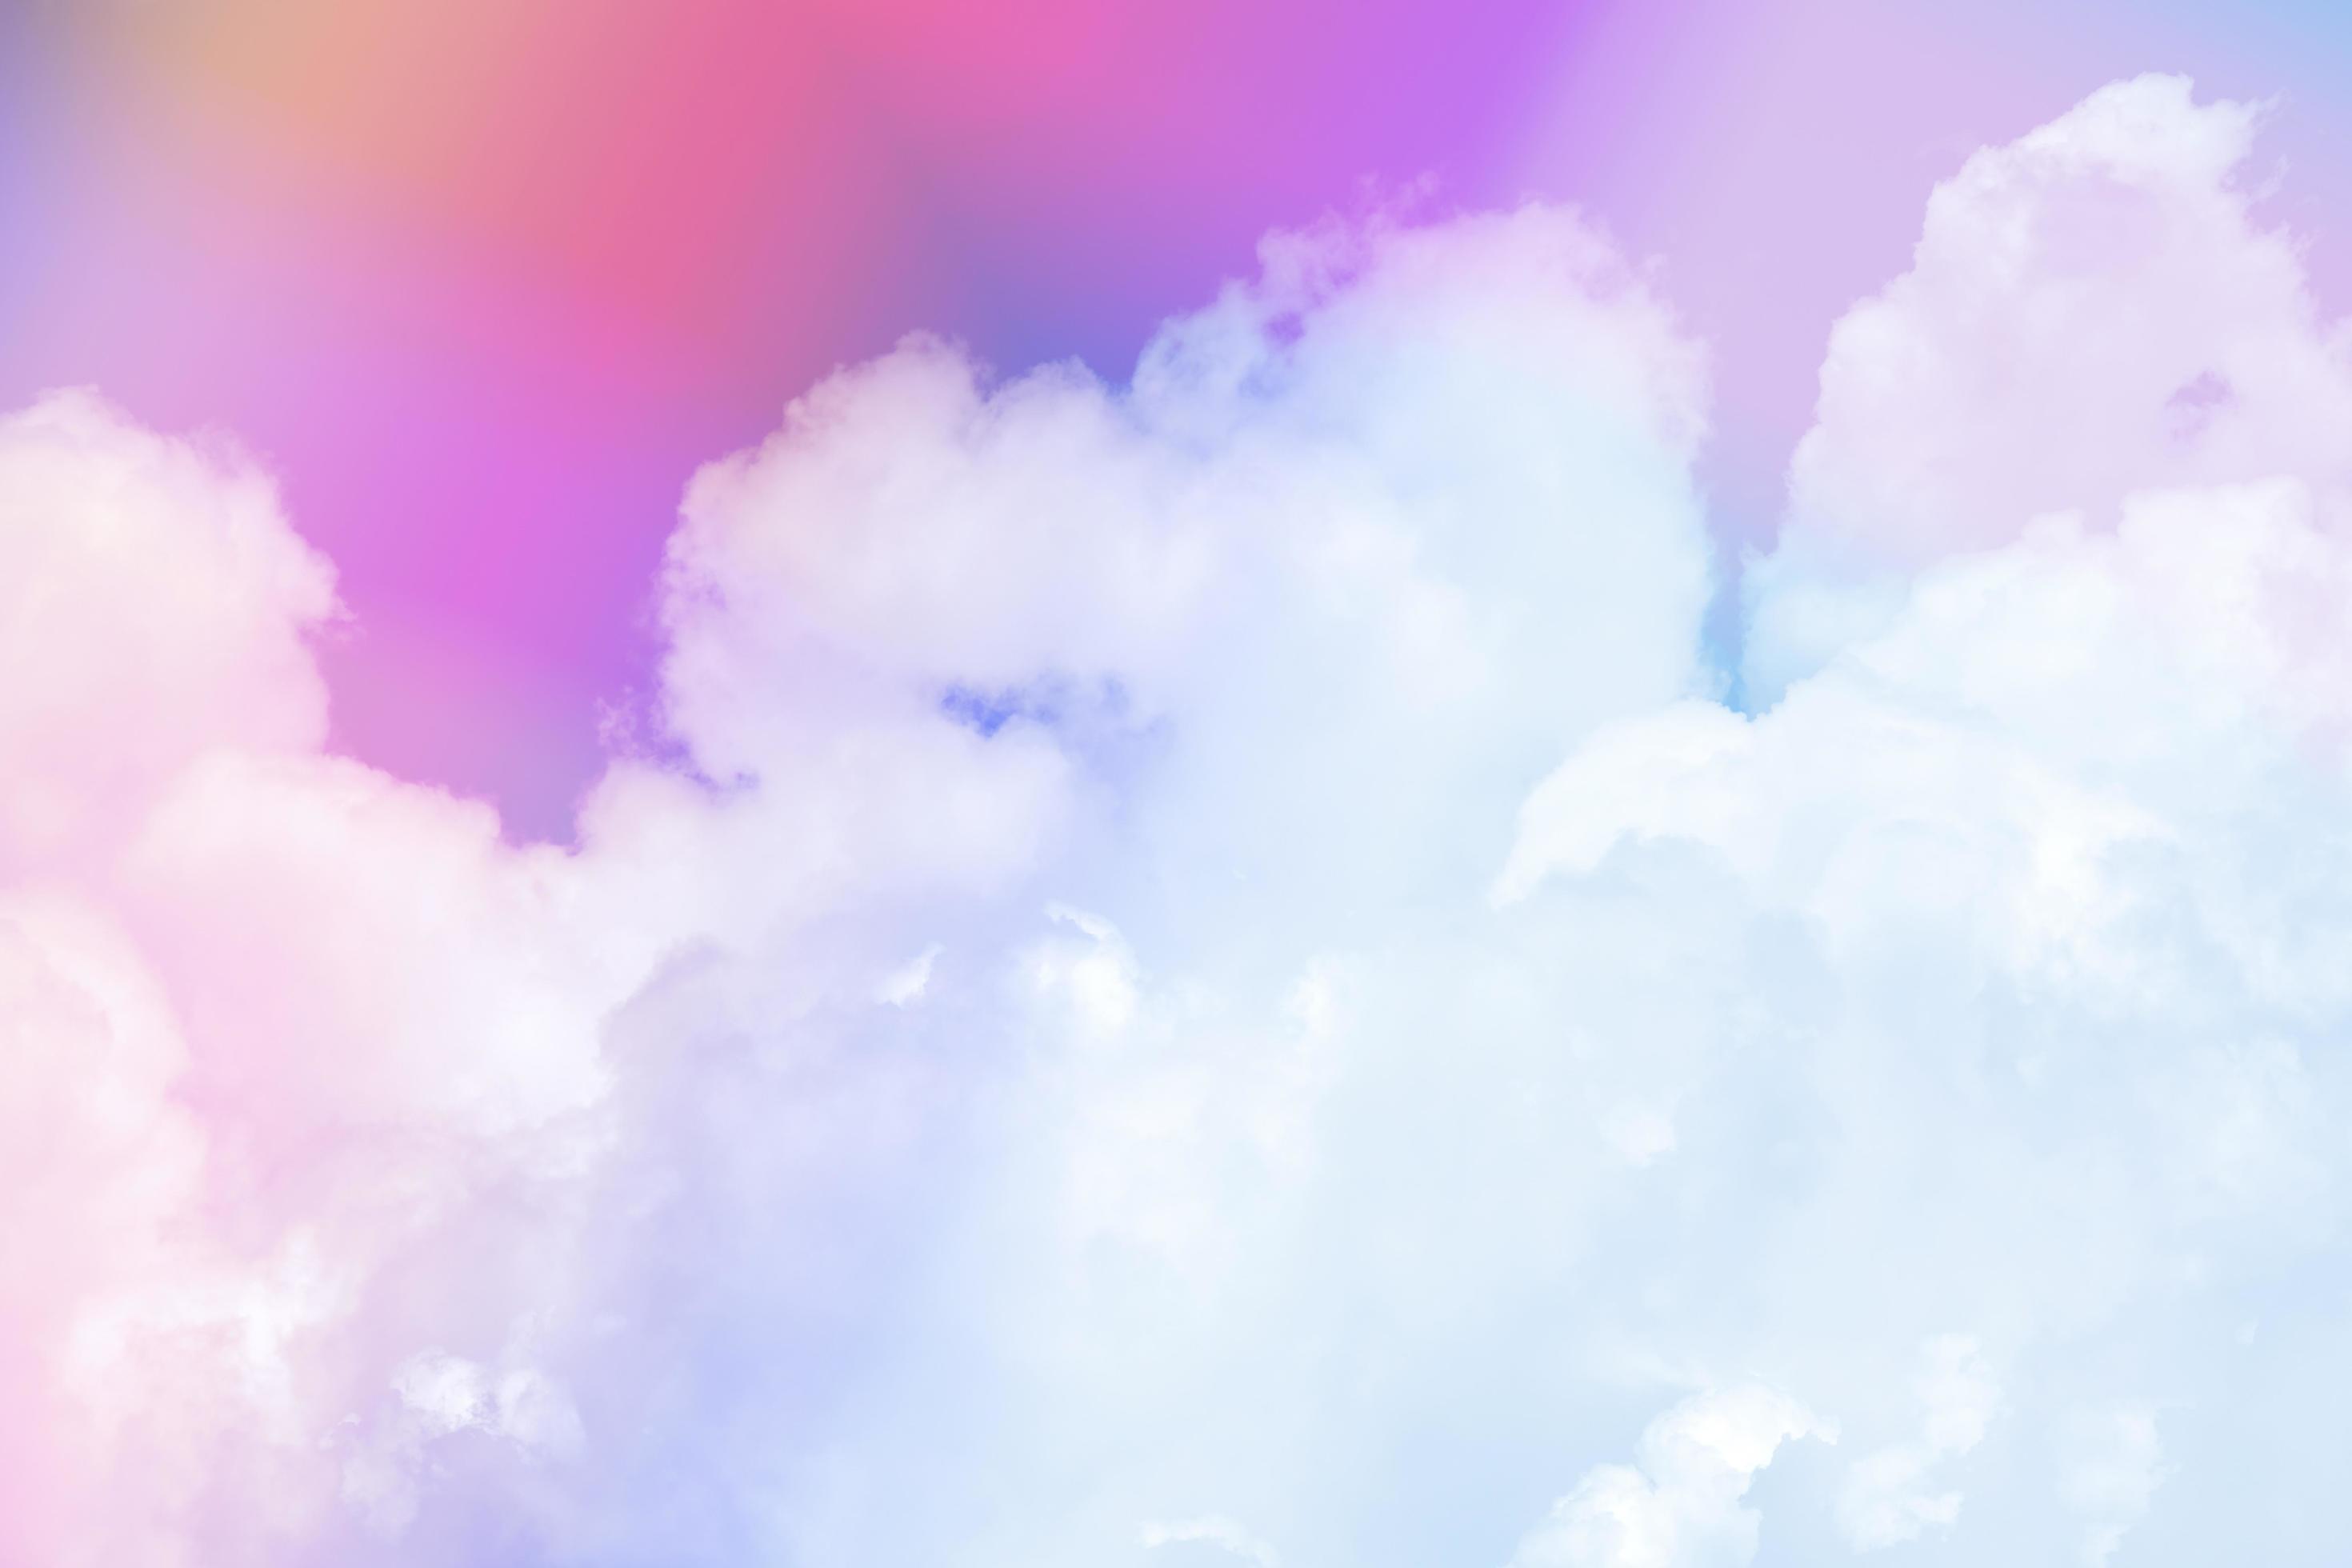 beauty sweet pastel red purple colorful with fluffy clouds on sky. multi color rainbow image. abstract fantasy growing light